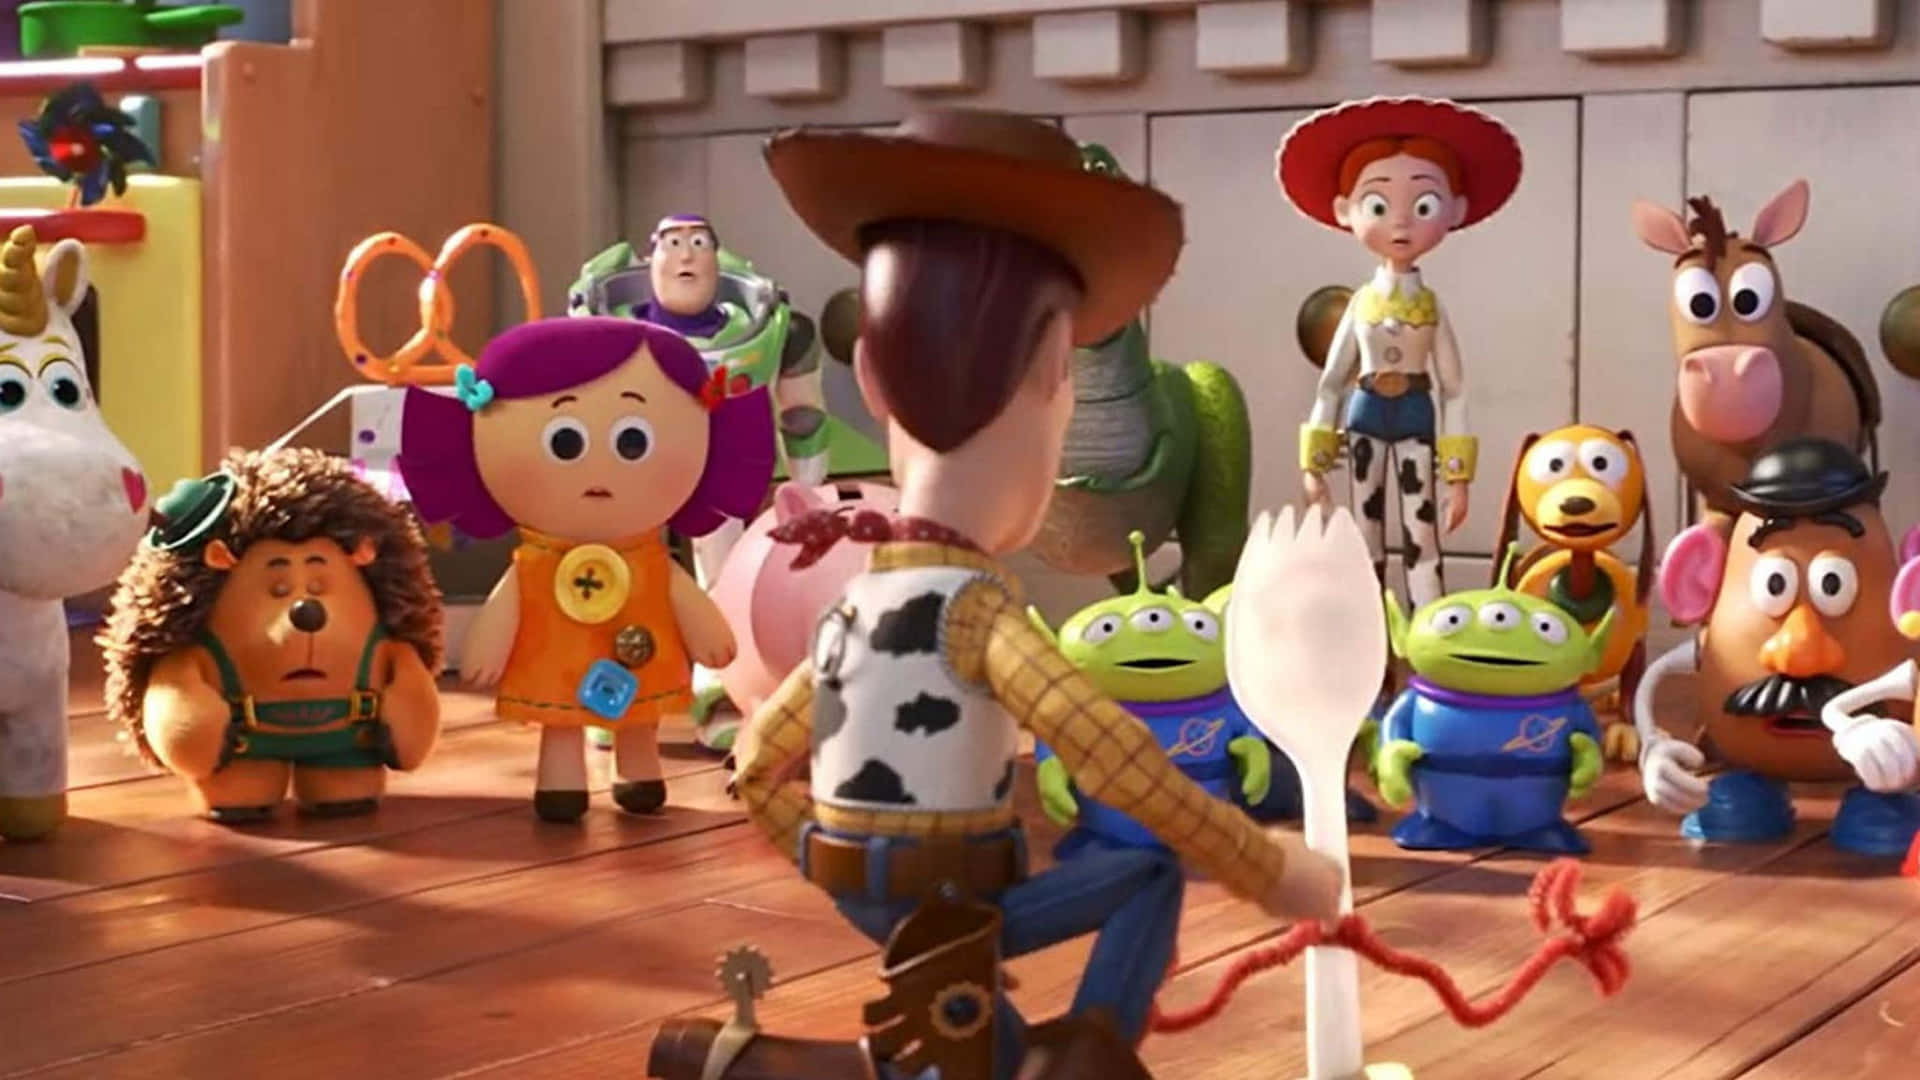 Join Woody, Buzz and all their friends on an all new adventure in Toy Story 4.